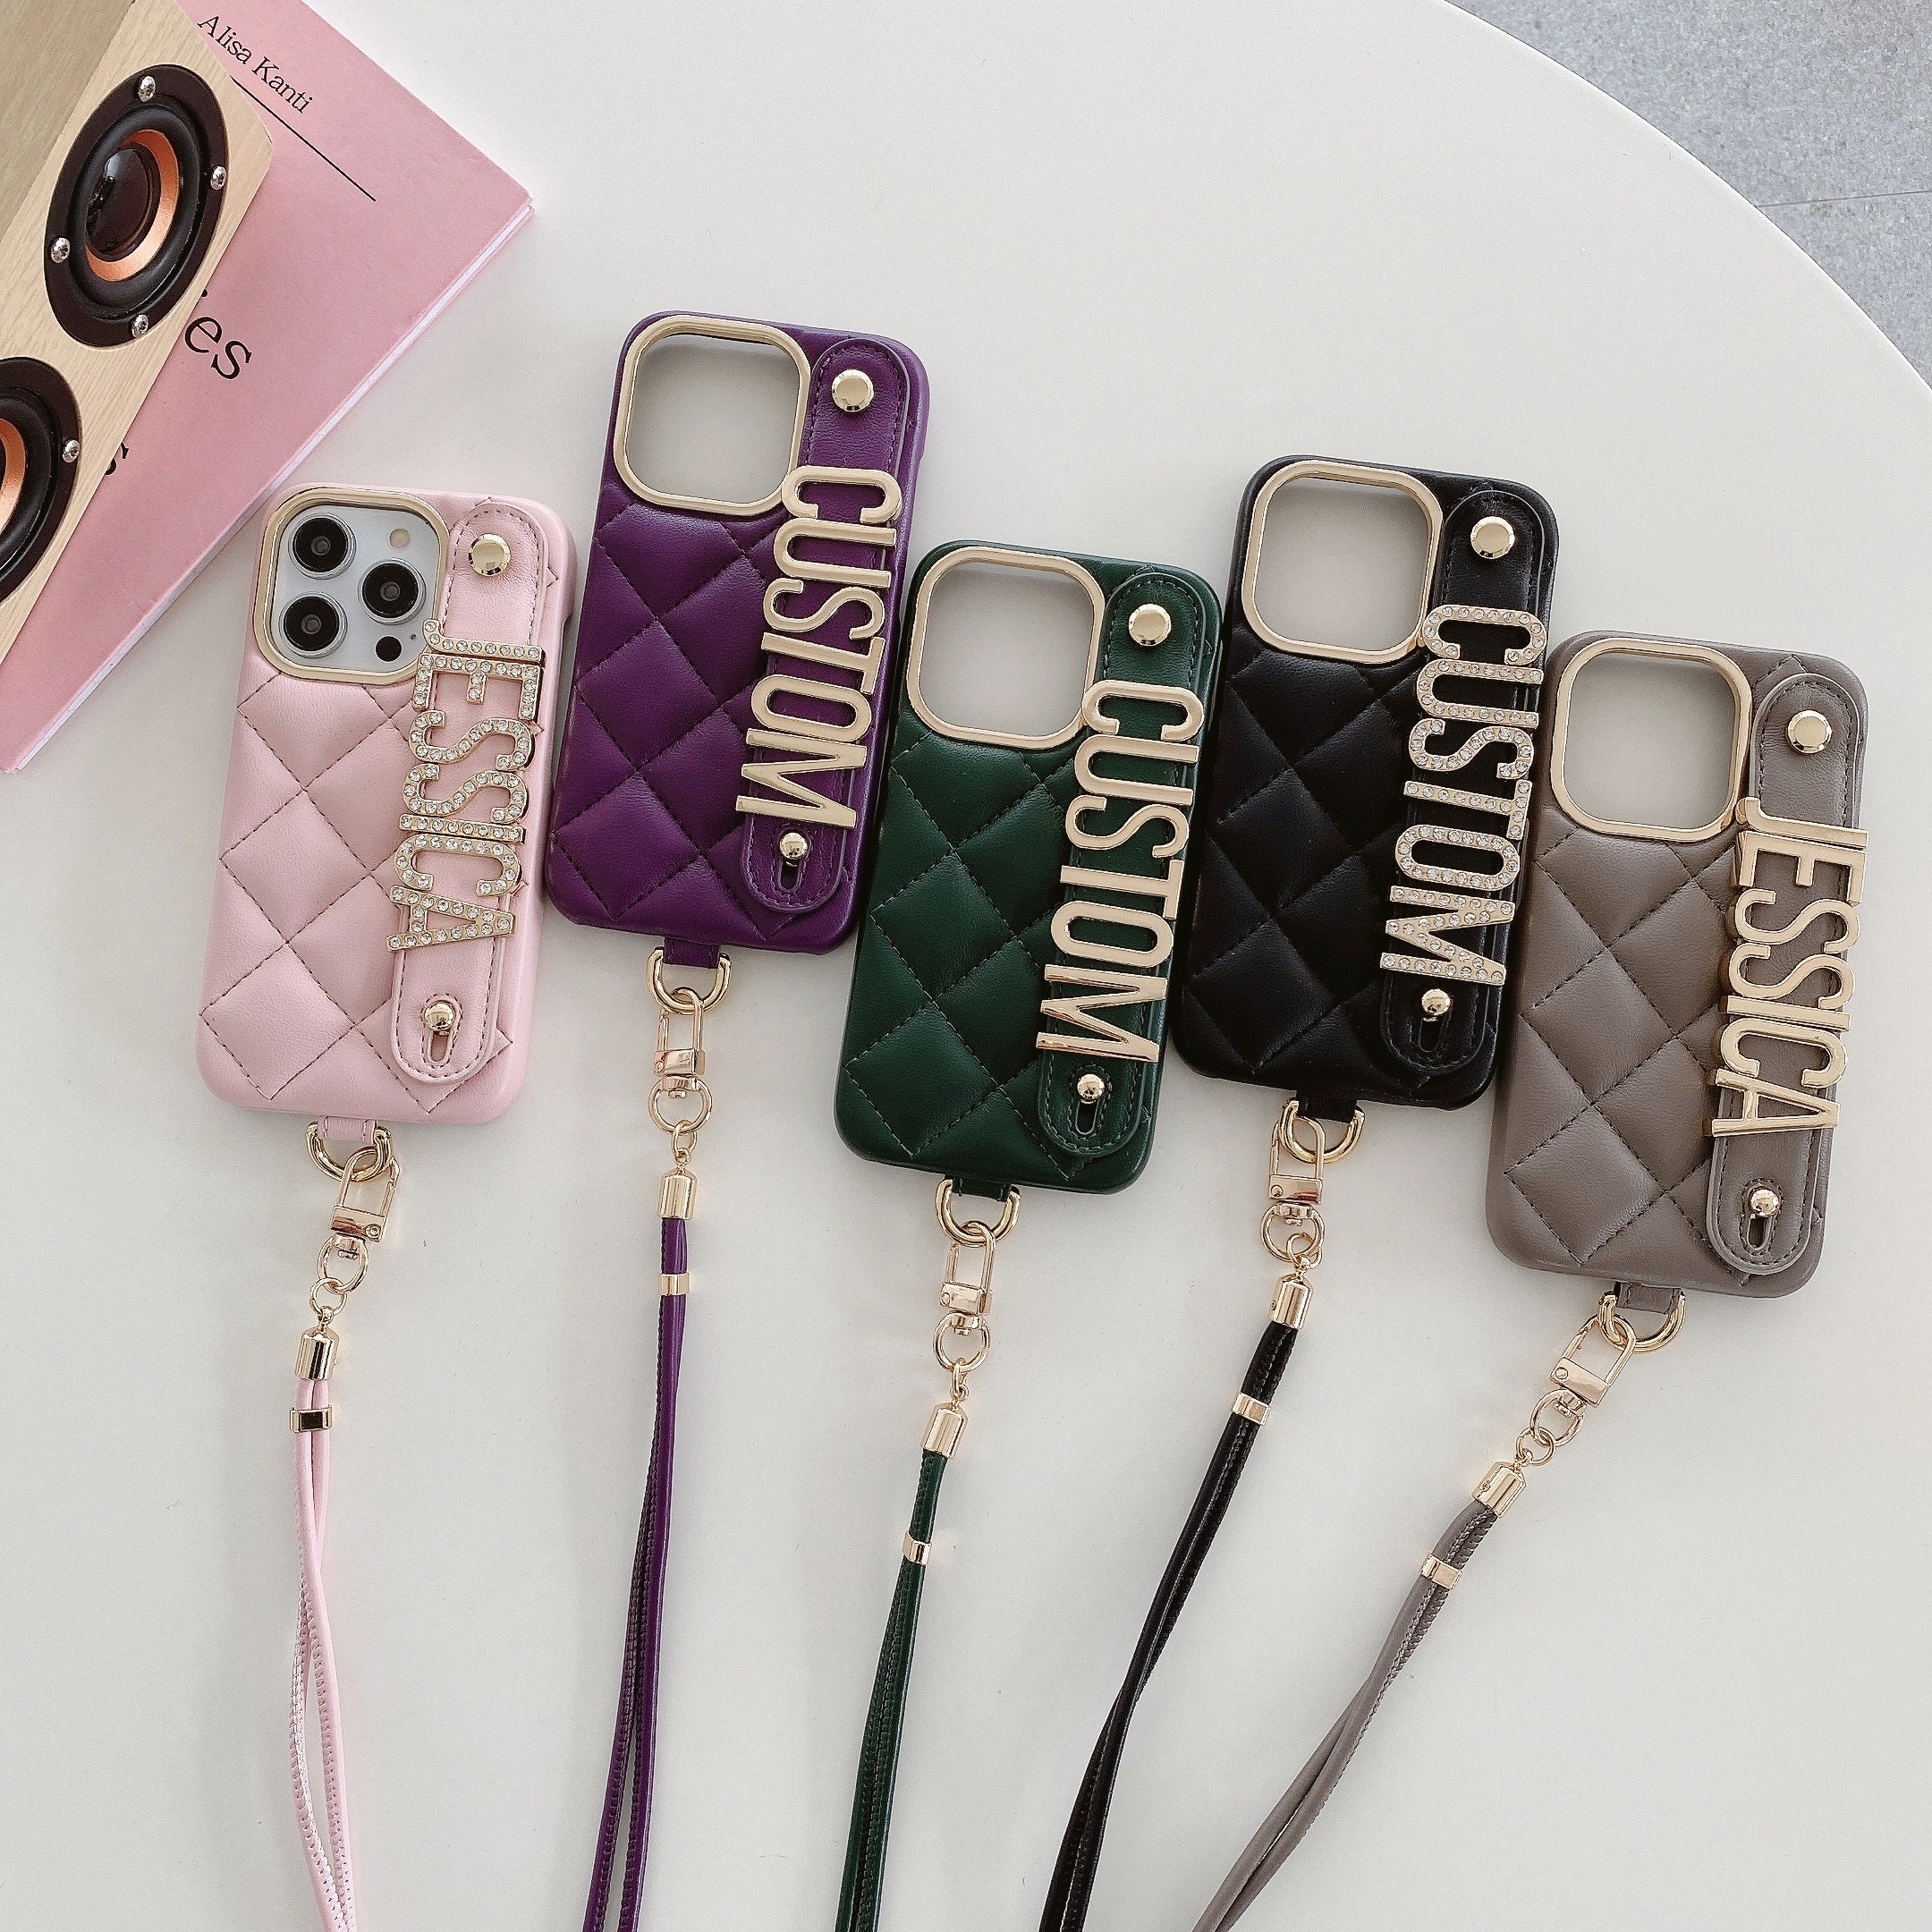 phone case  Luxury iphone cases, Chanel iphone case, Louis